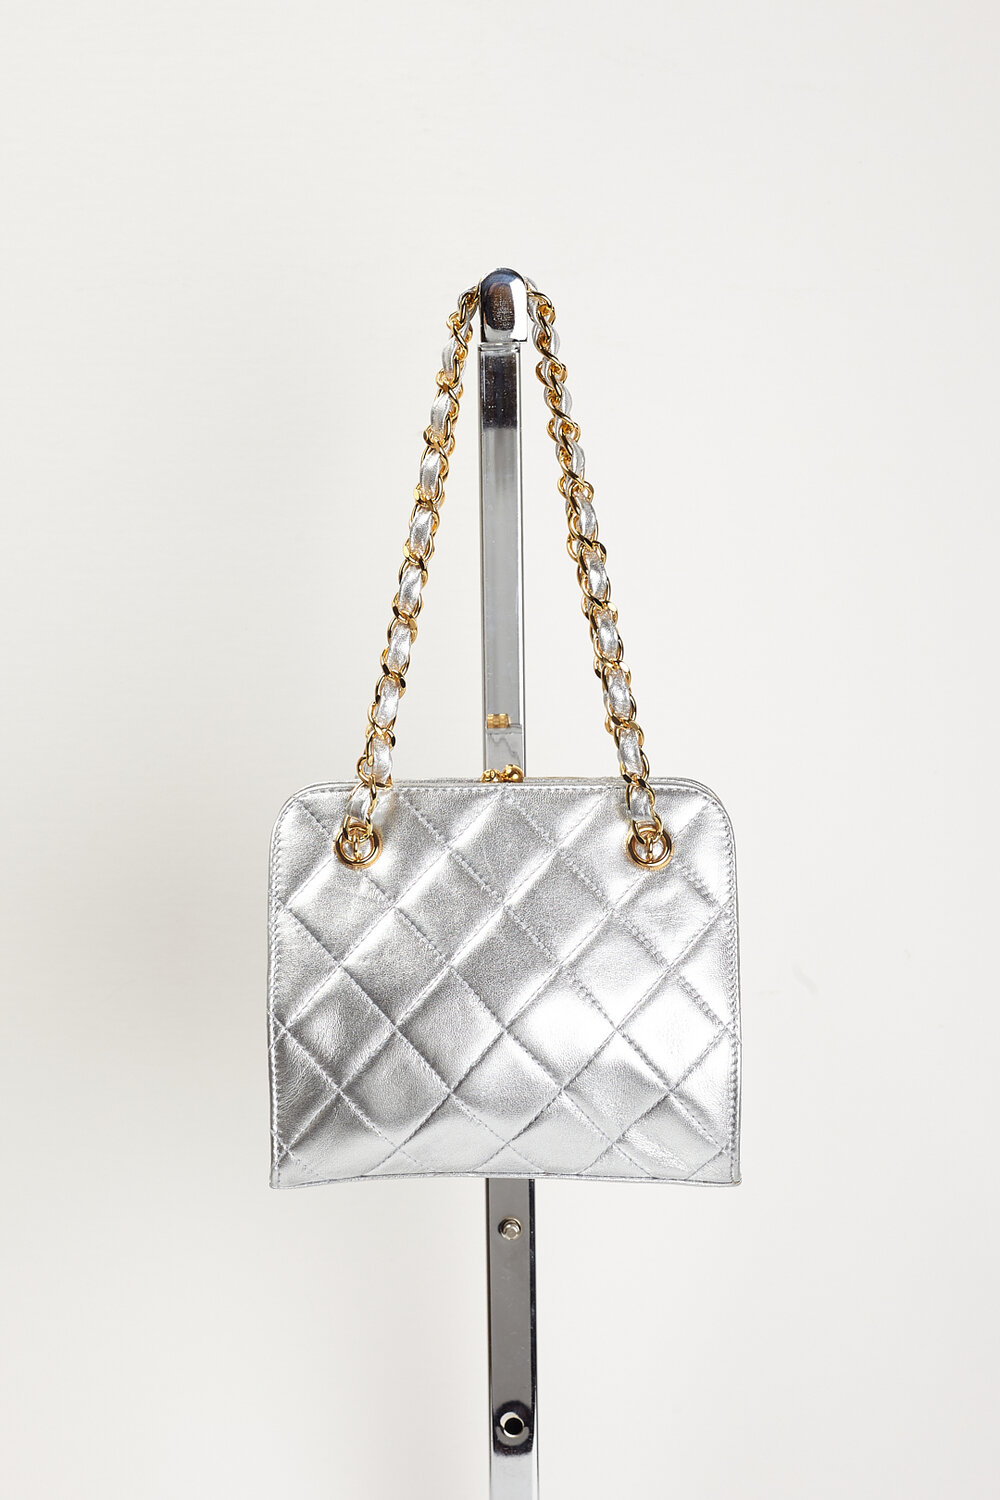 Chanel White Lambskin Kiss-Lock Closure Bag with Silver Hardware